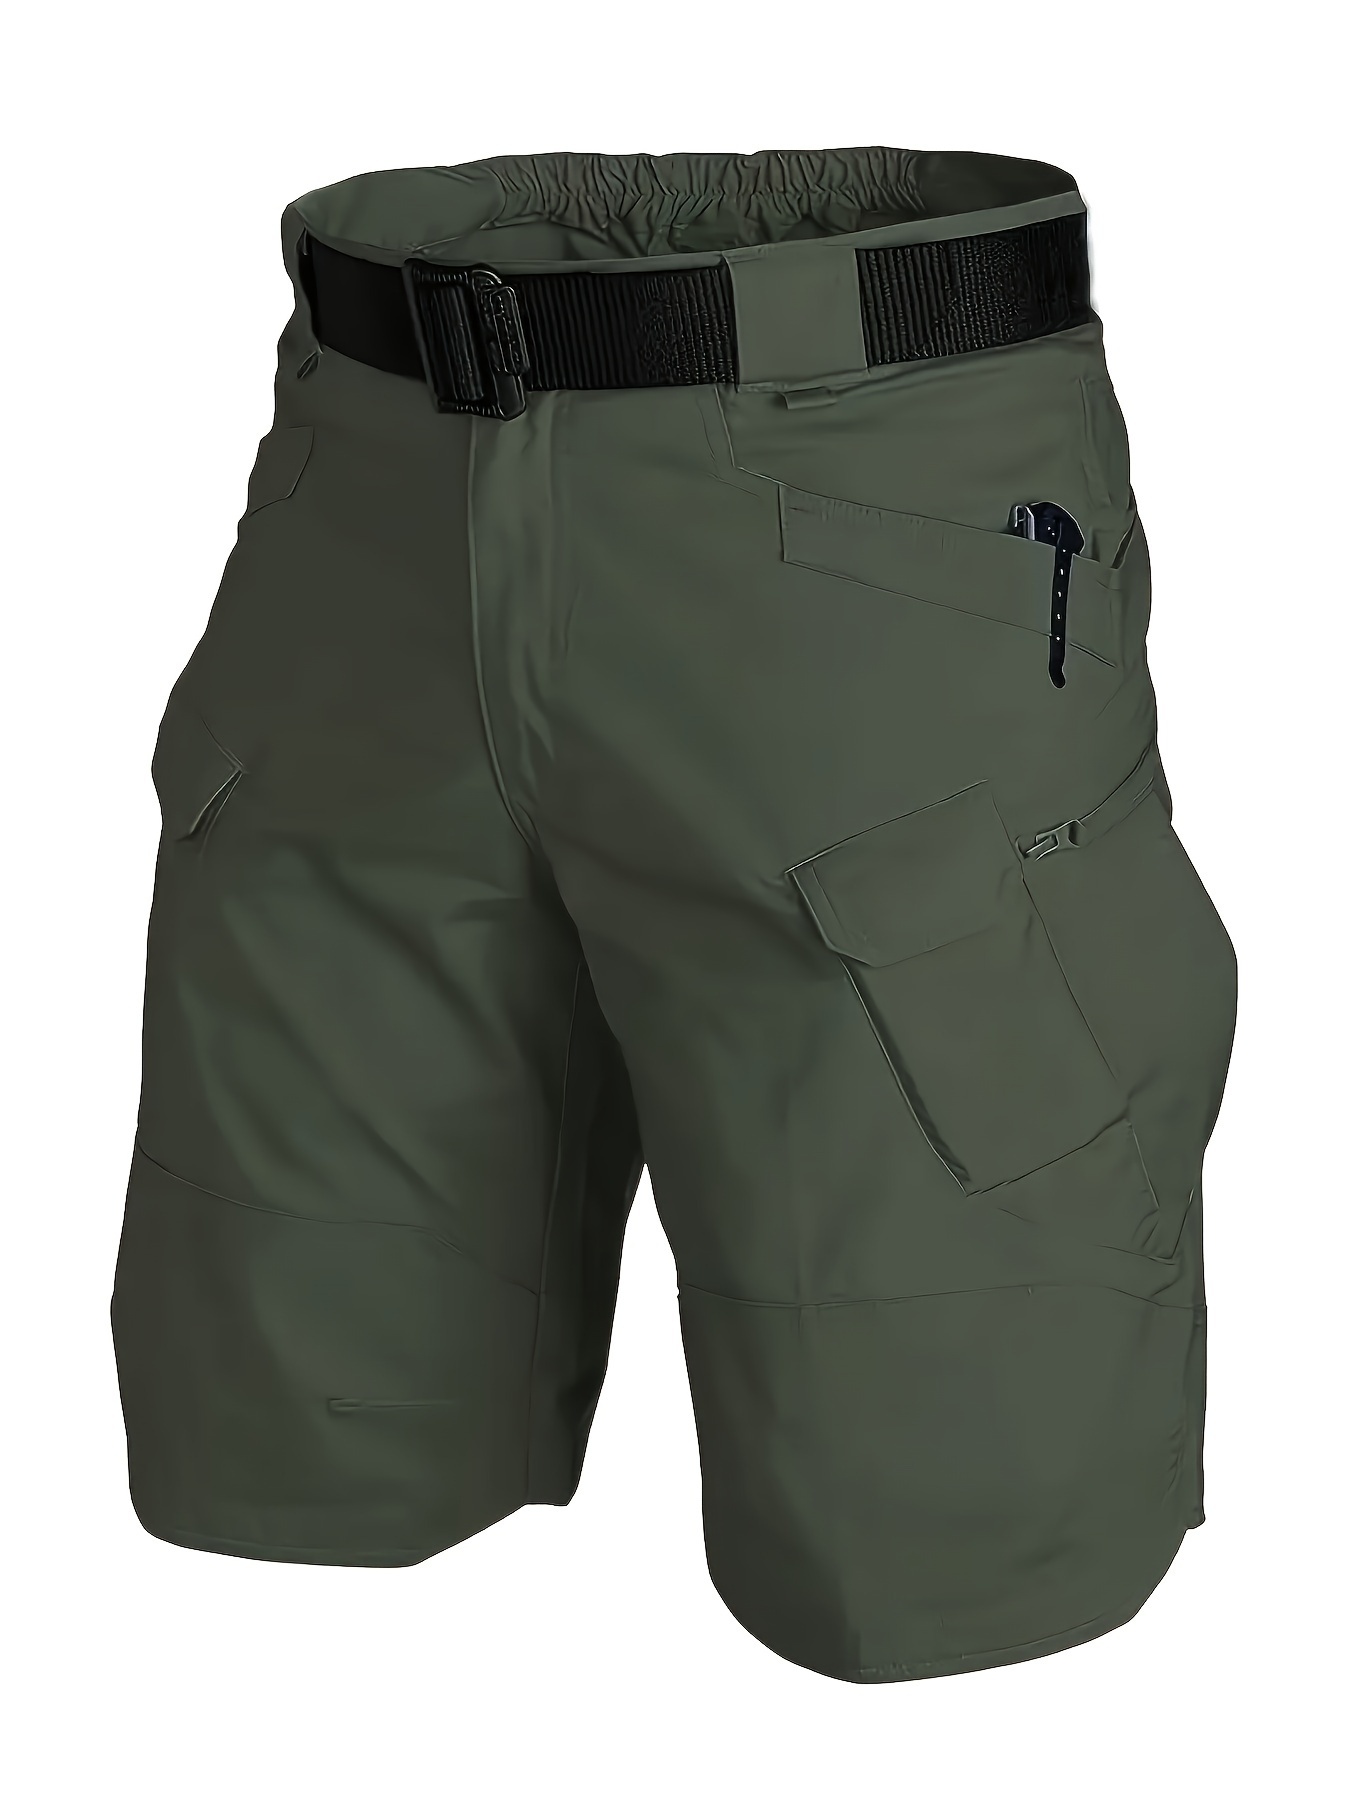 Surenow Men's Hiking Cargo Shorts Quick Dry Outdoor Tactical Shorts for Men  with Pocket Lightweight Breathable Fishing Shorts Army Green at  Men's  Clothing store